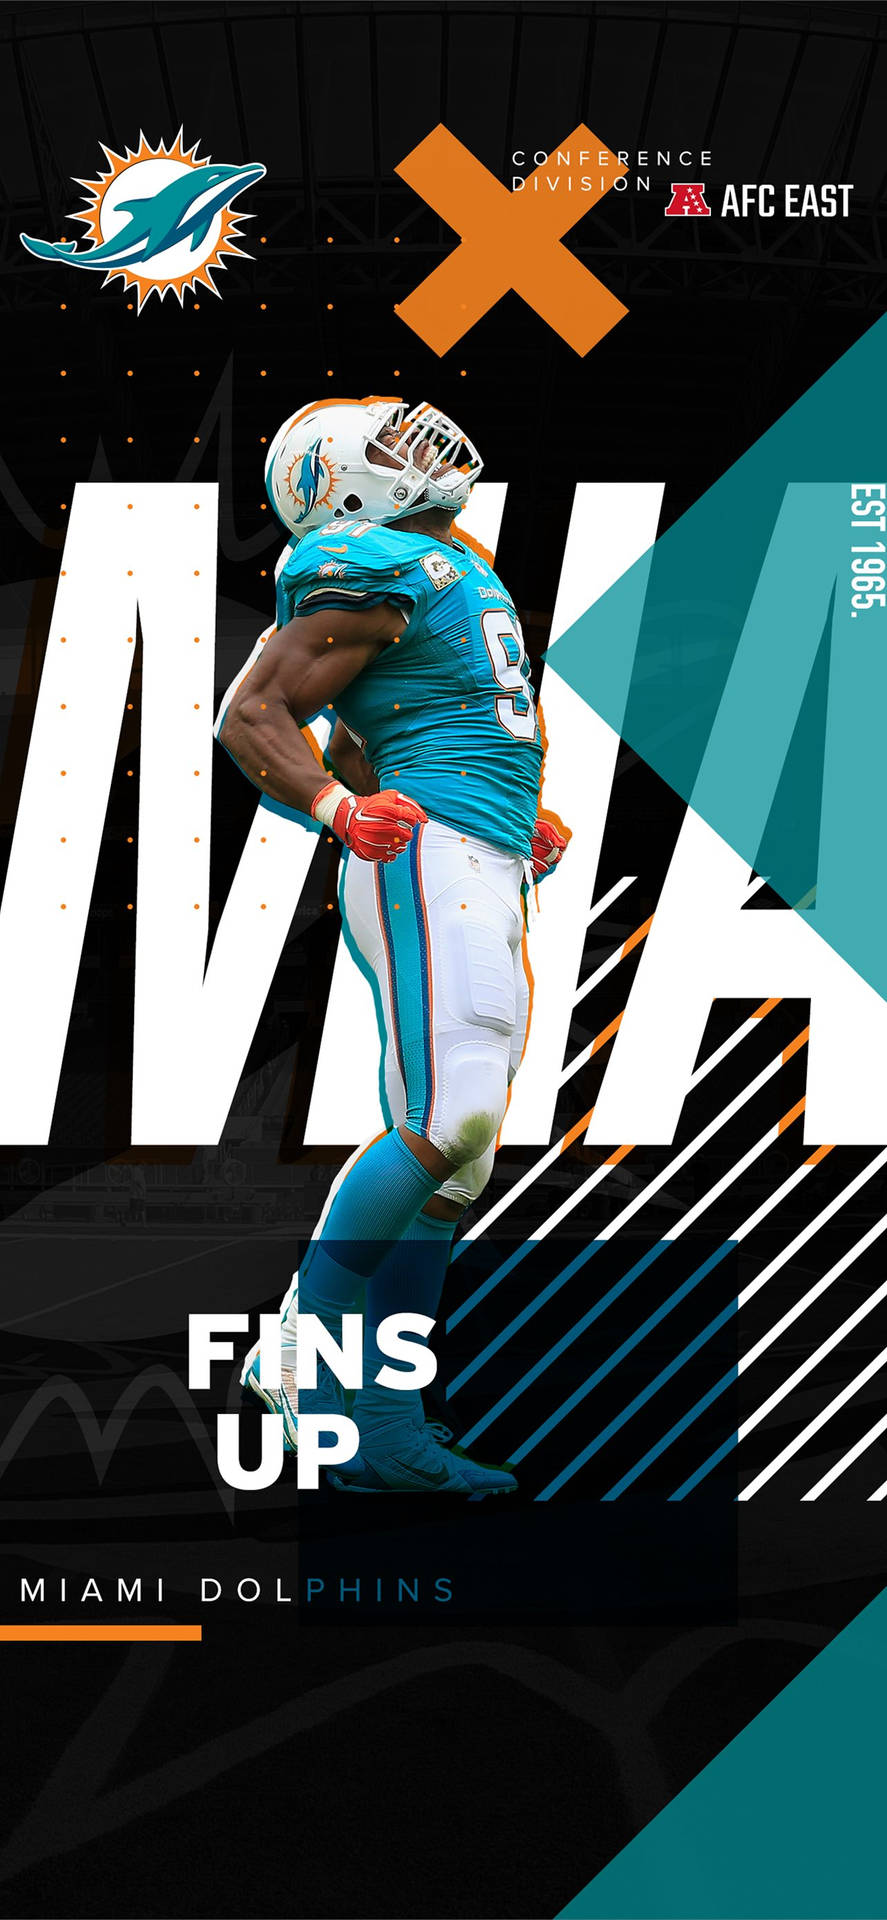 Check out this amazing Miami Dolphins iPhone background! Wallpaper